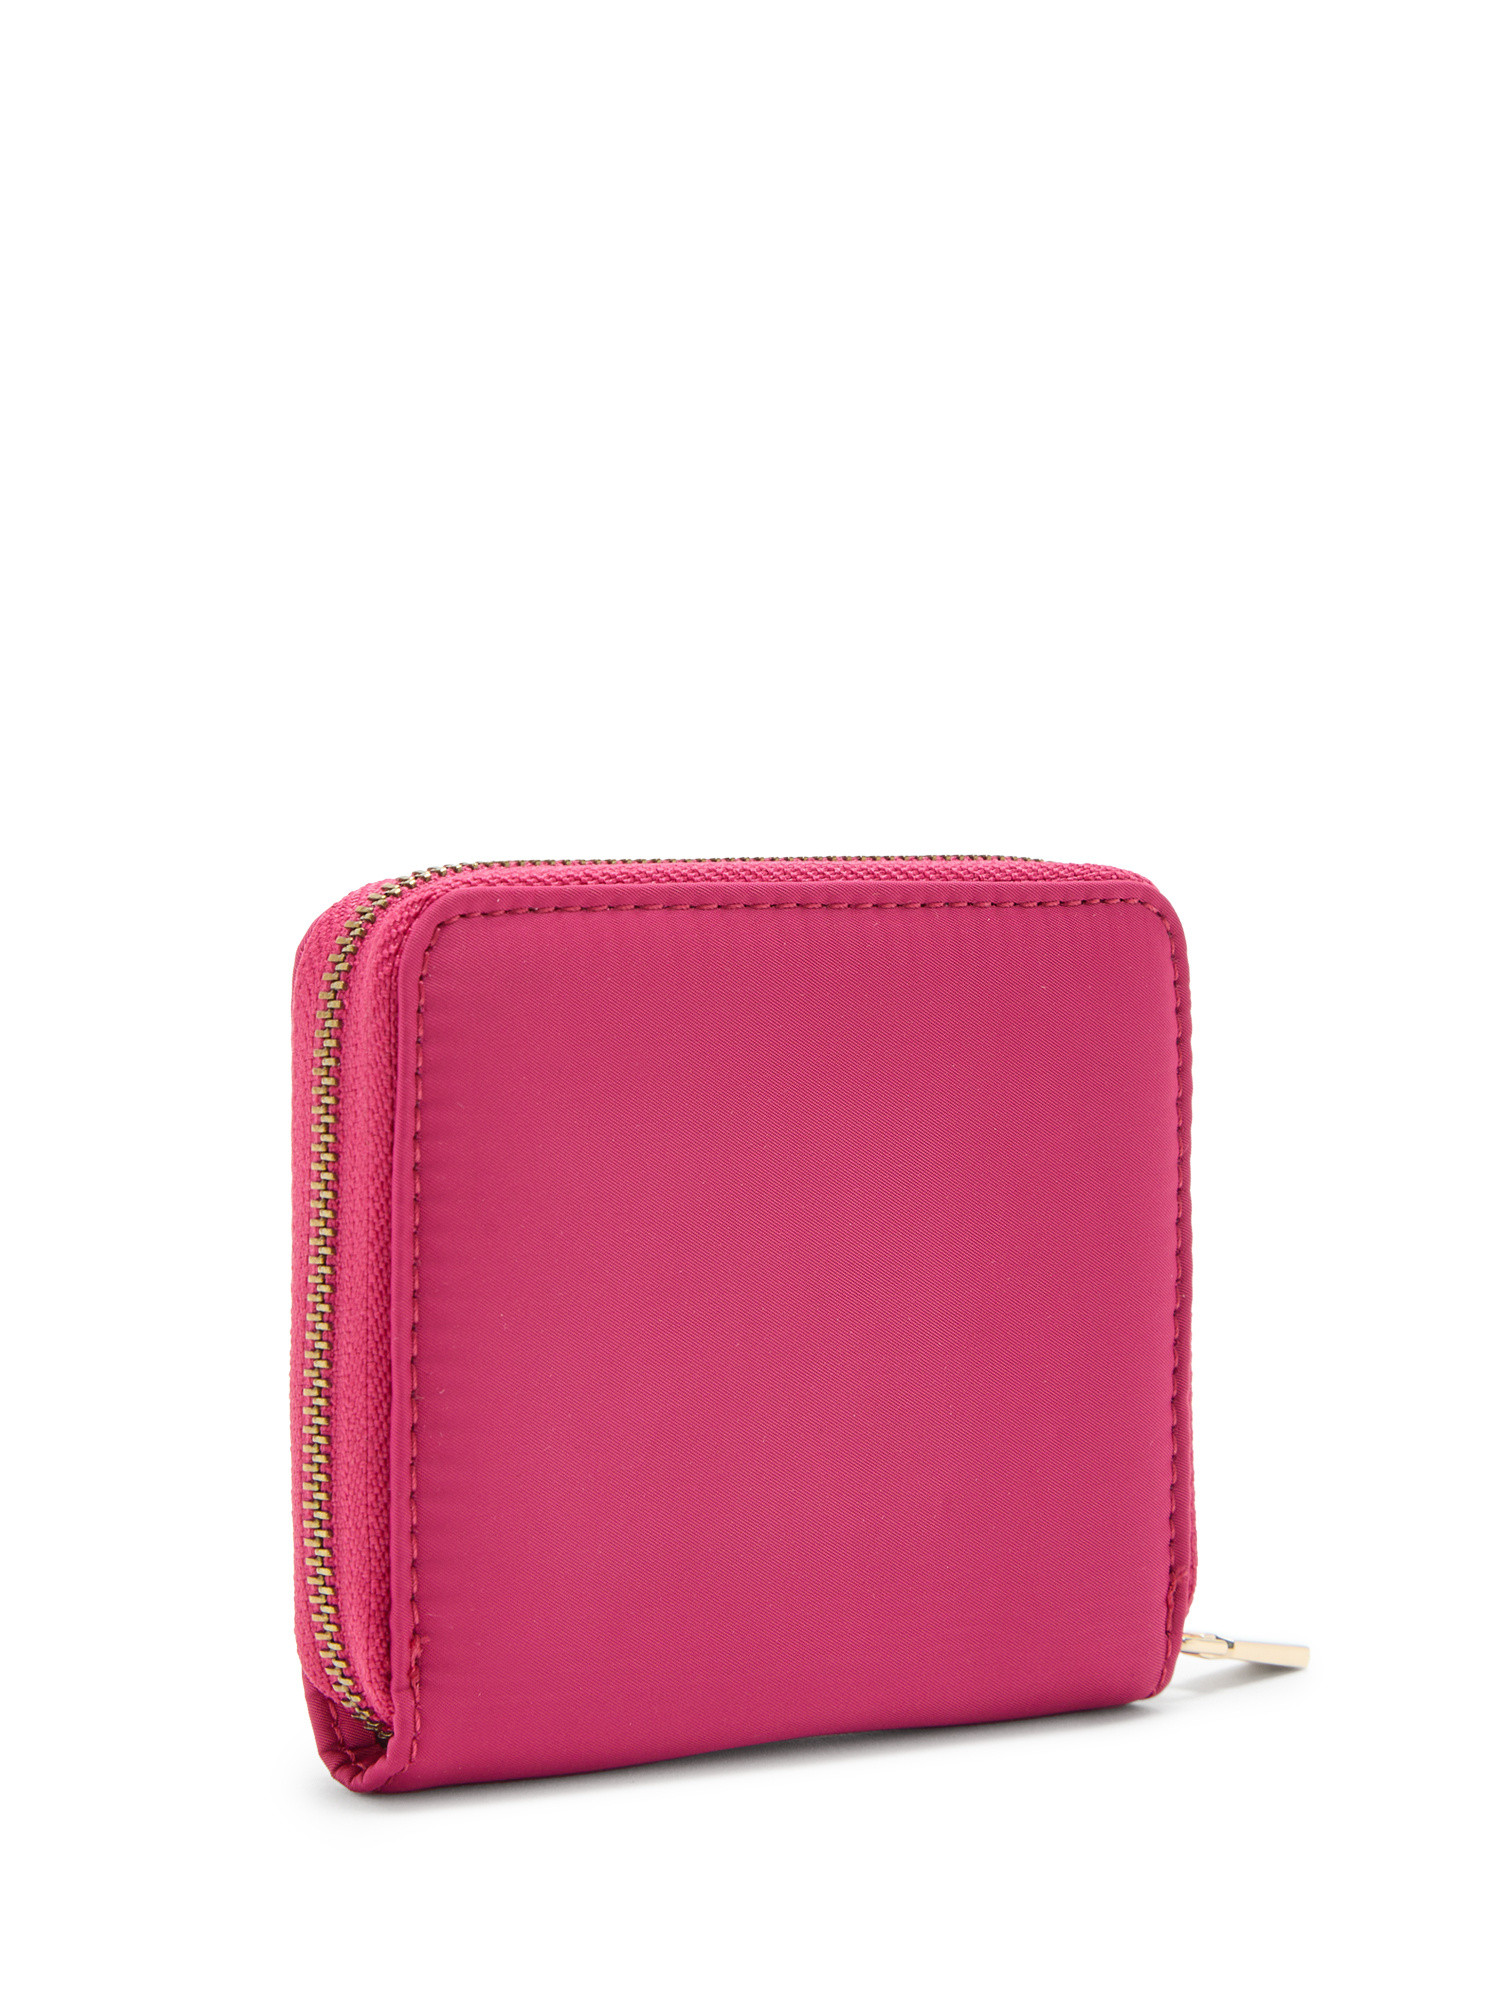 Guess - Gemma eco mini wallet, Red, large image number 1